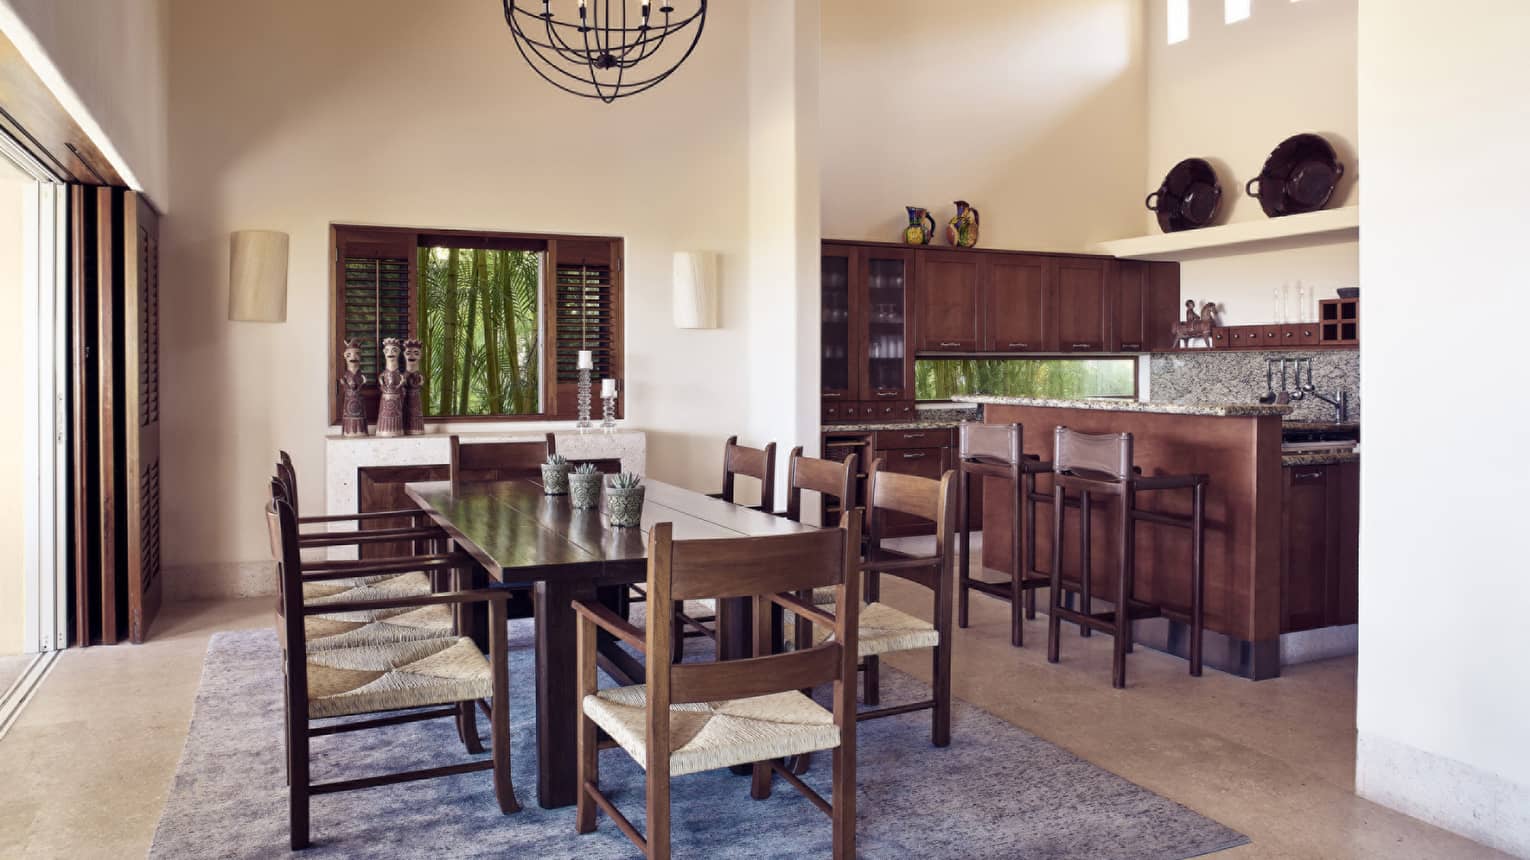 Kitchen and dining area with wooden table and chairs for eight